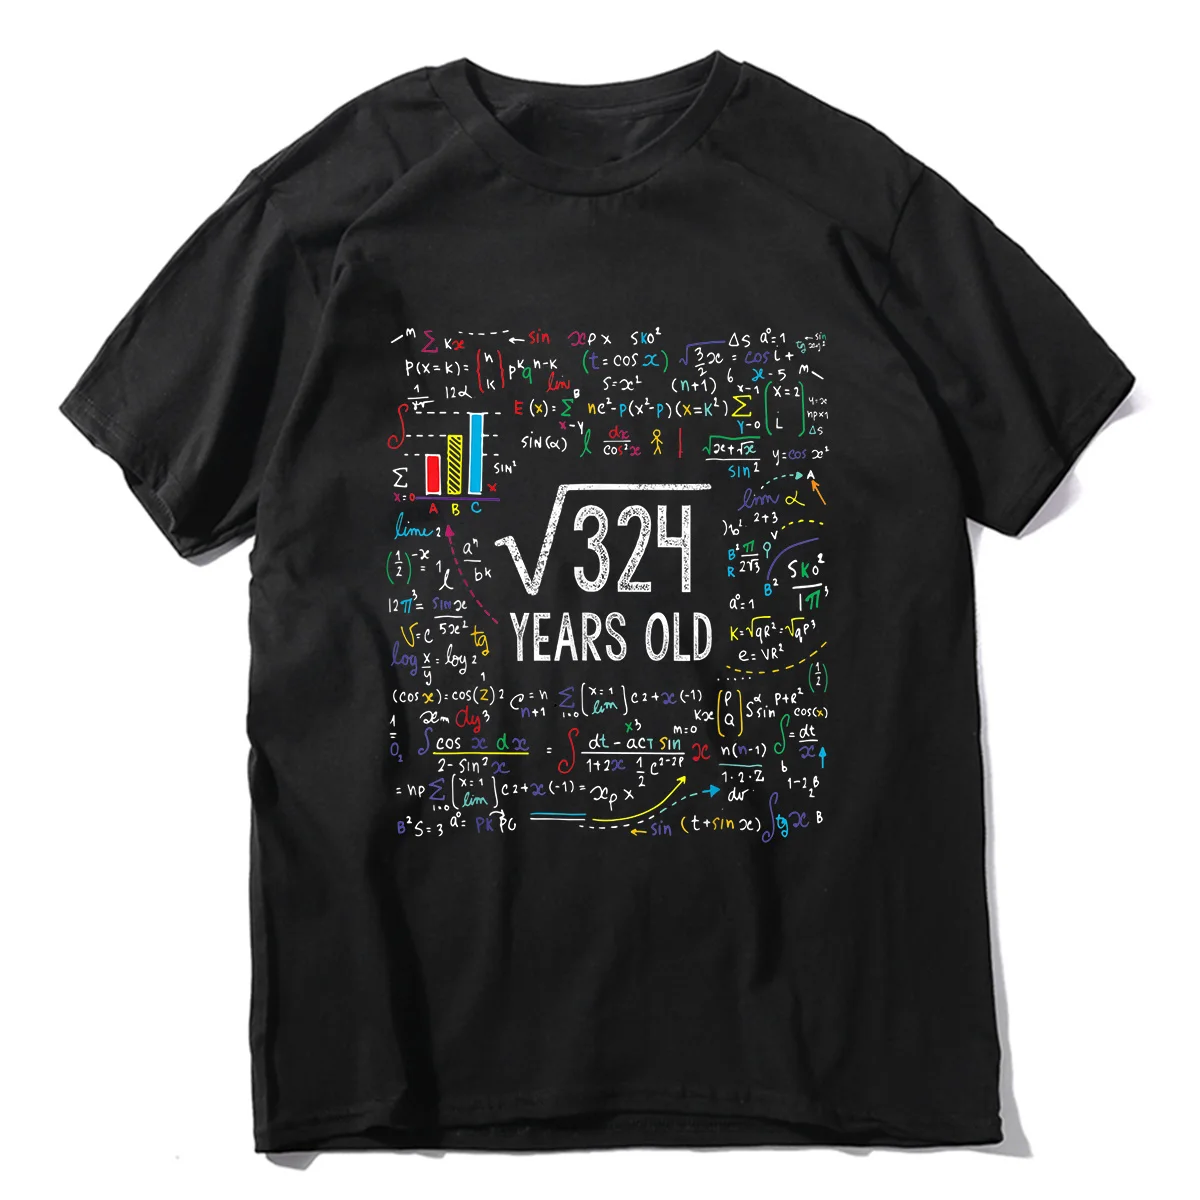 Unisex 100% Cotton Square Root Of 324 18th Birthday 18 Year Old Gifts Math Bday T-Shirt Men Clothing Tee Streetwear Casual Tops